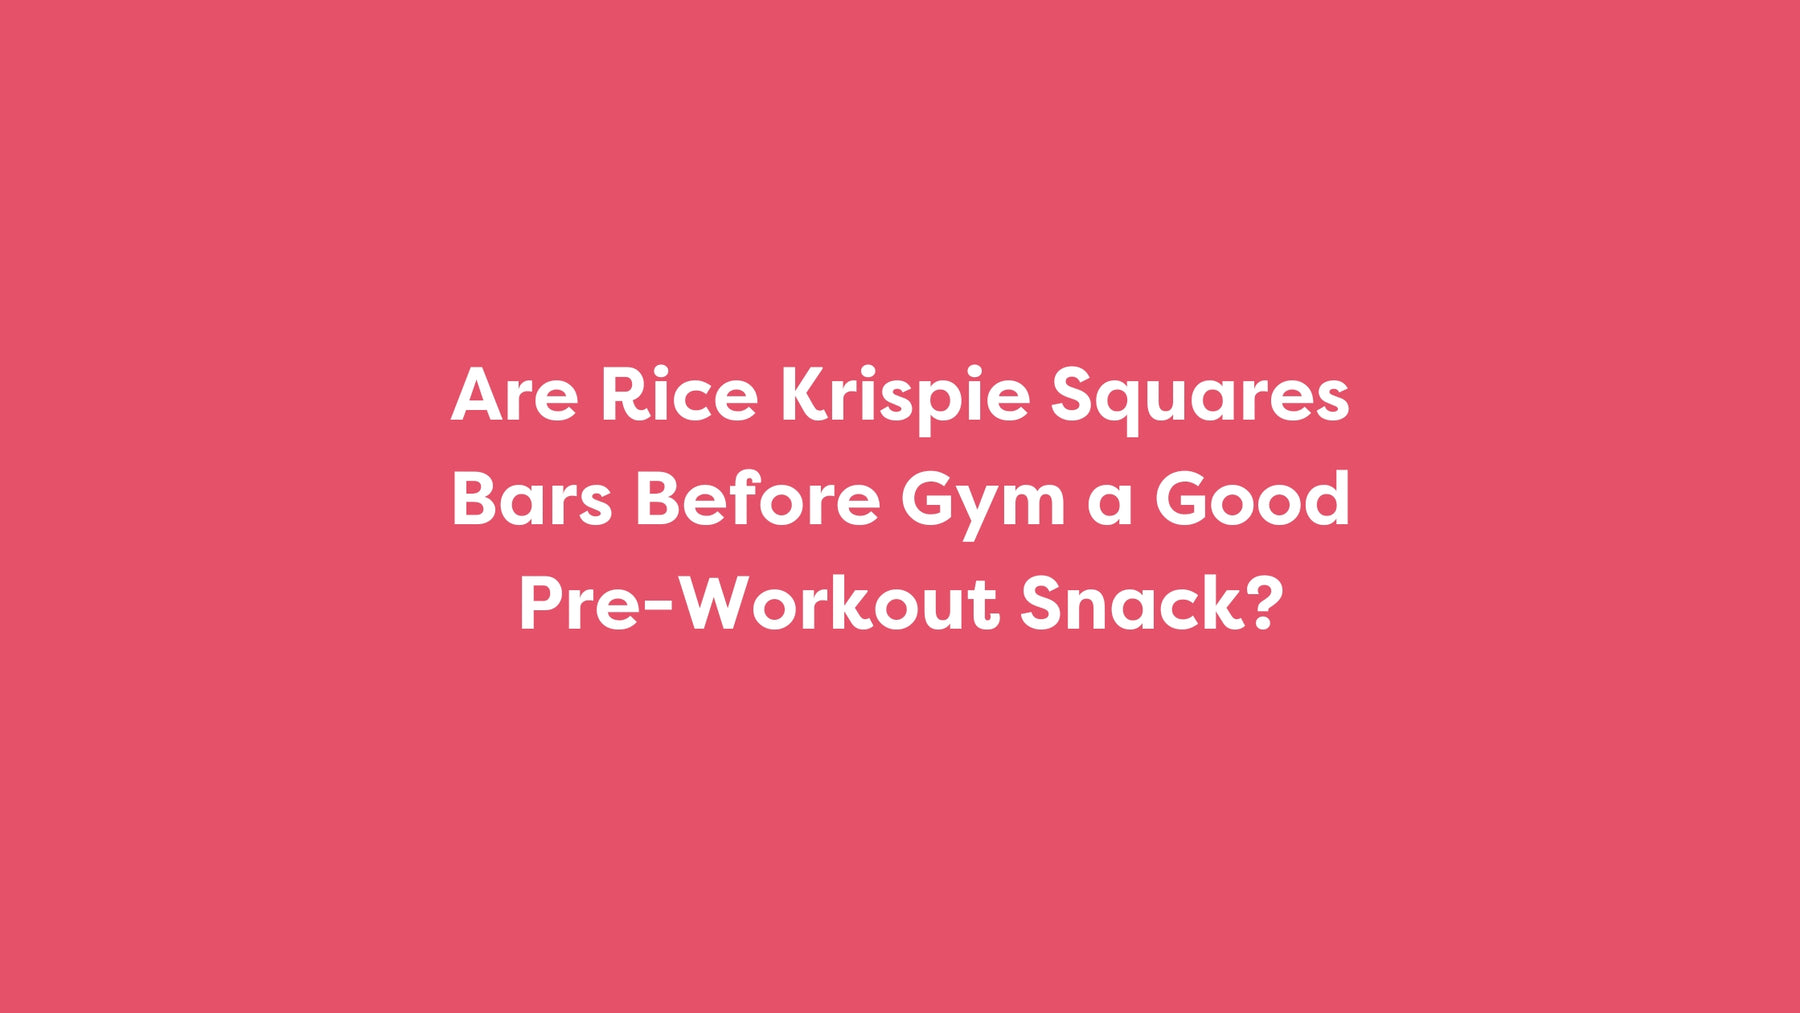 Are Rice Krispie Squares Bars Before Gym a Good Pre-Workout Snack?